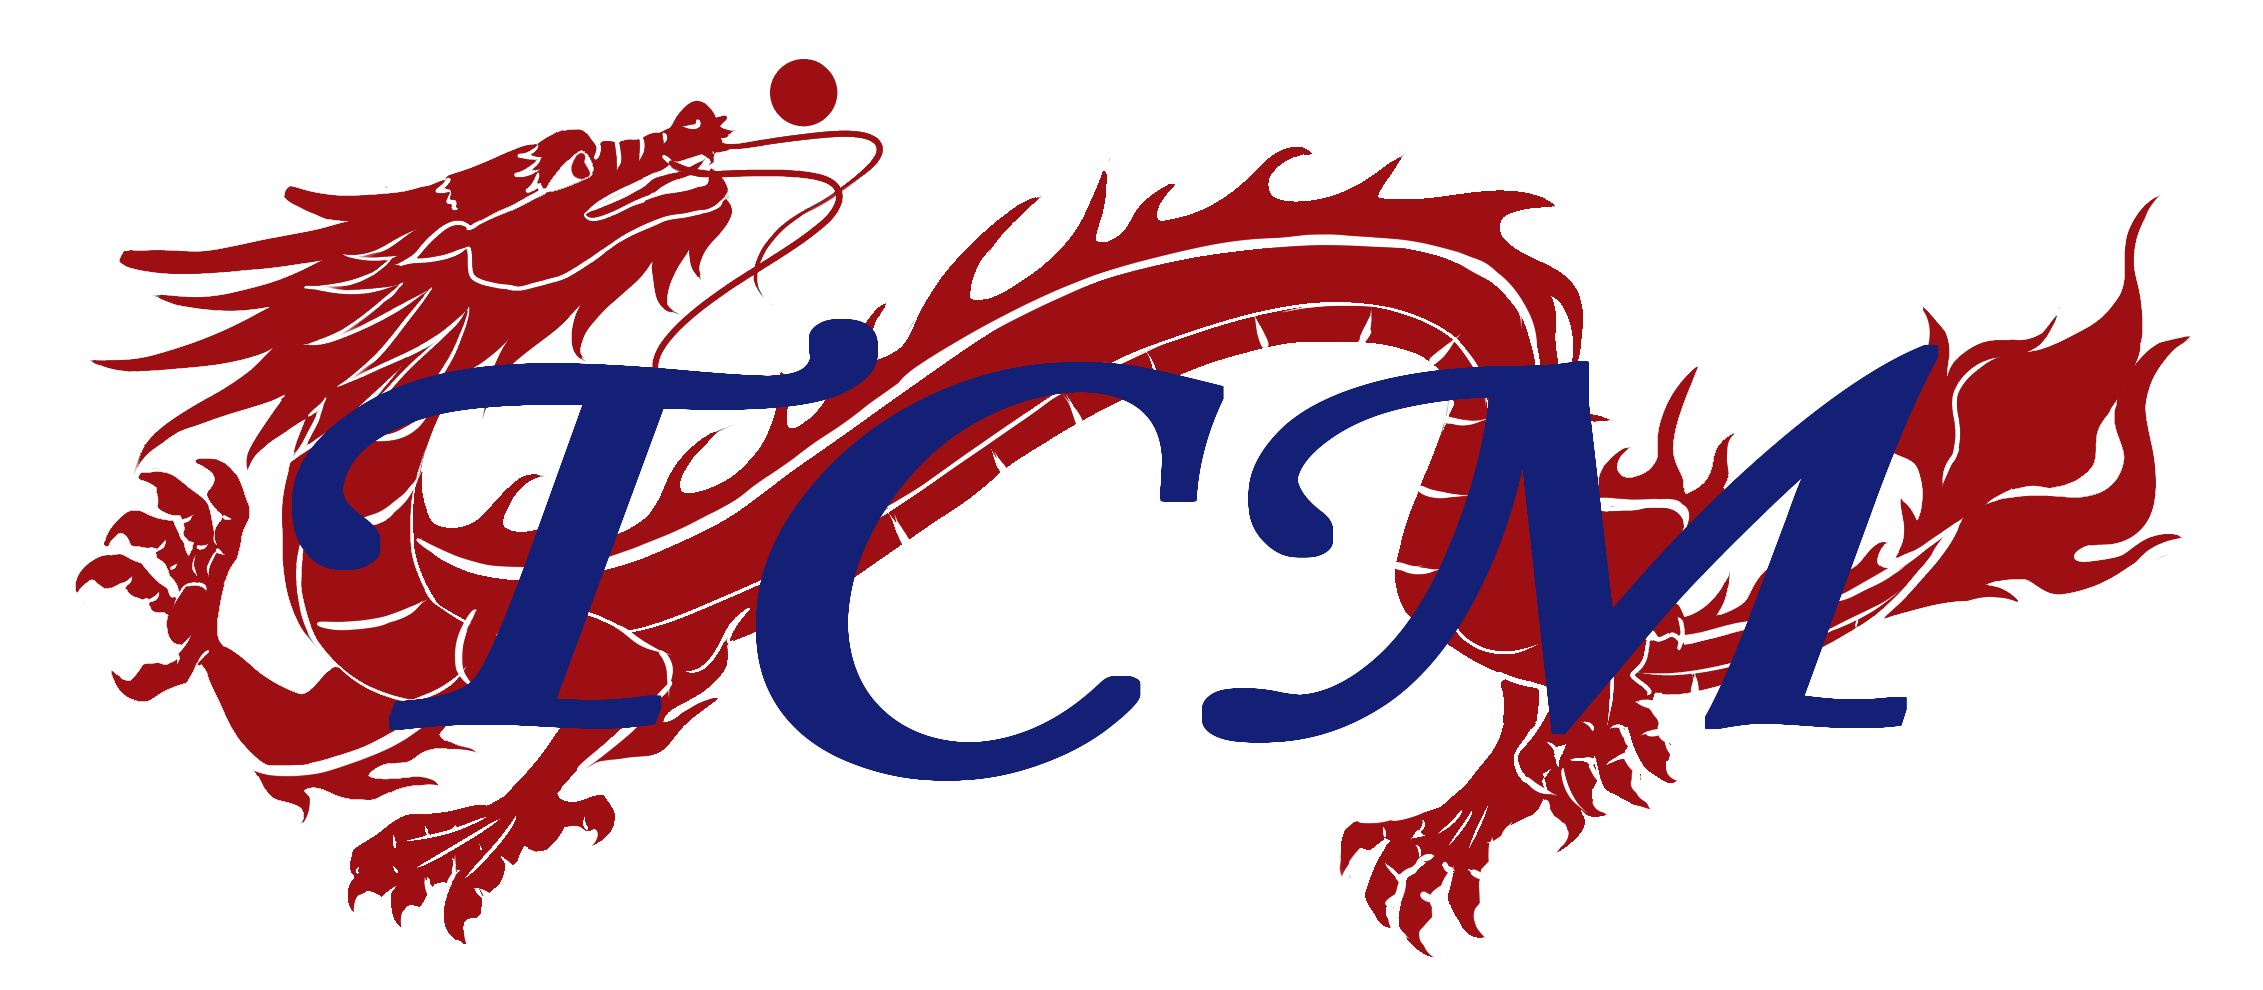 TCM Logo with the wordmark TCM in blue over a red, stylized dragon